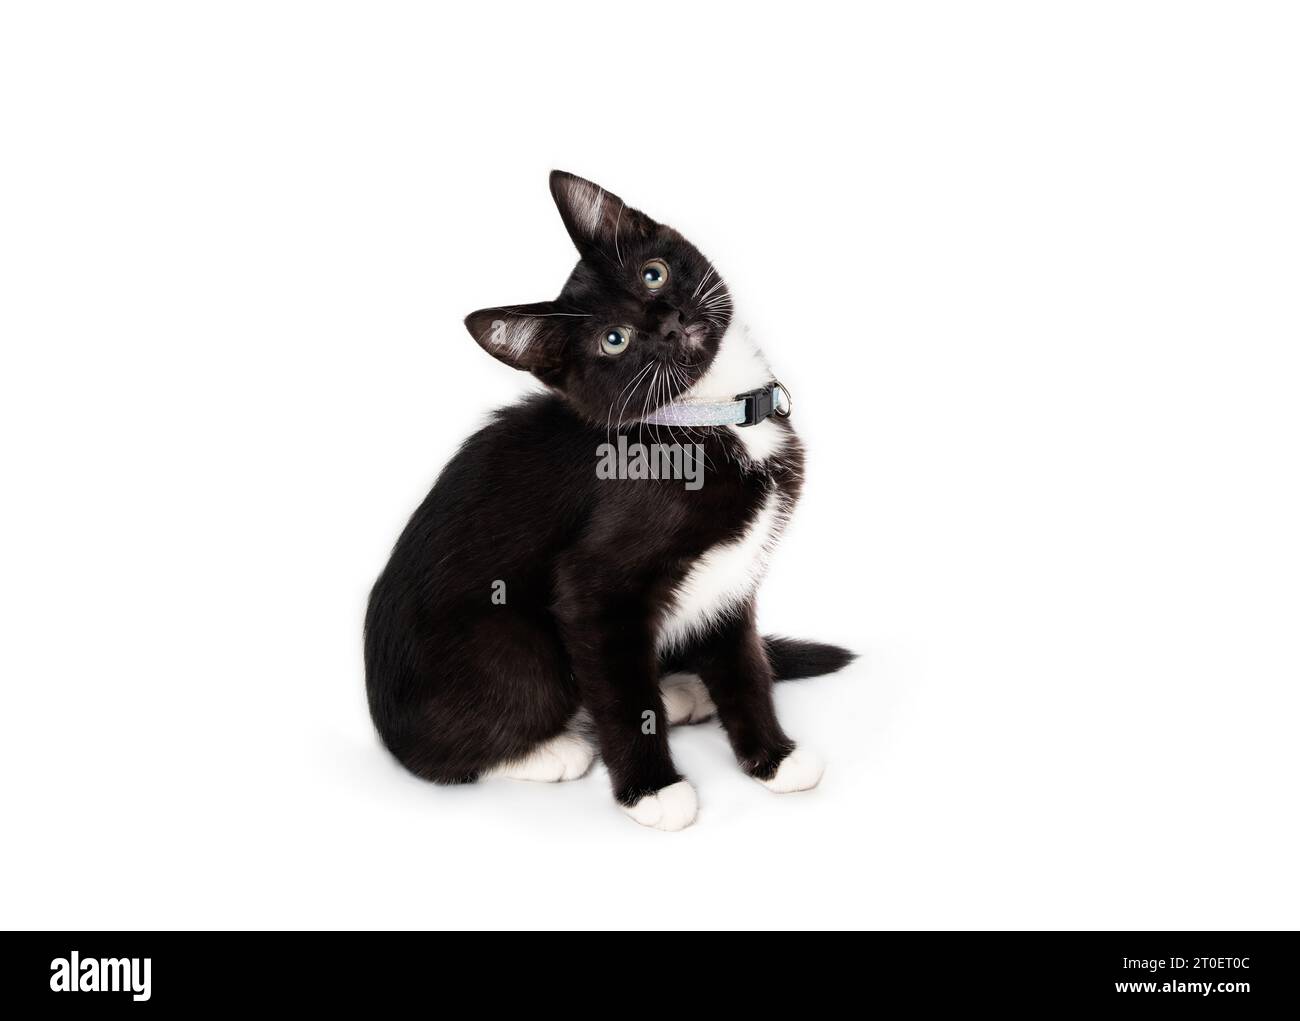 Curios kitty sitting with tilted head while looking up. Side view of cute black and white kitten with interested body language. 8 week old tuxedo cat Stock Photo